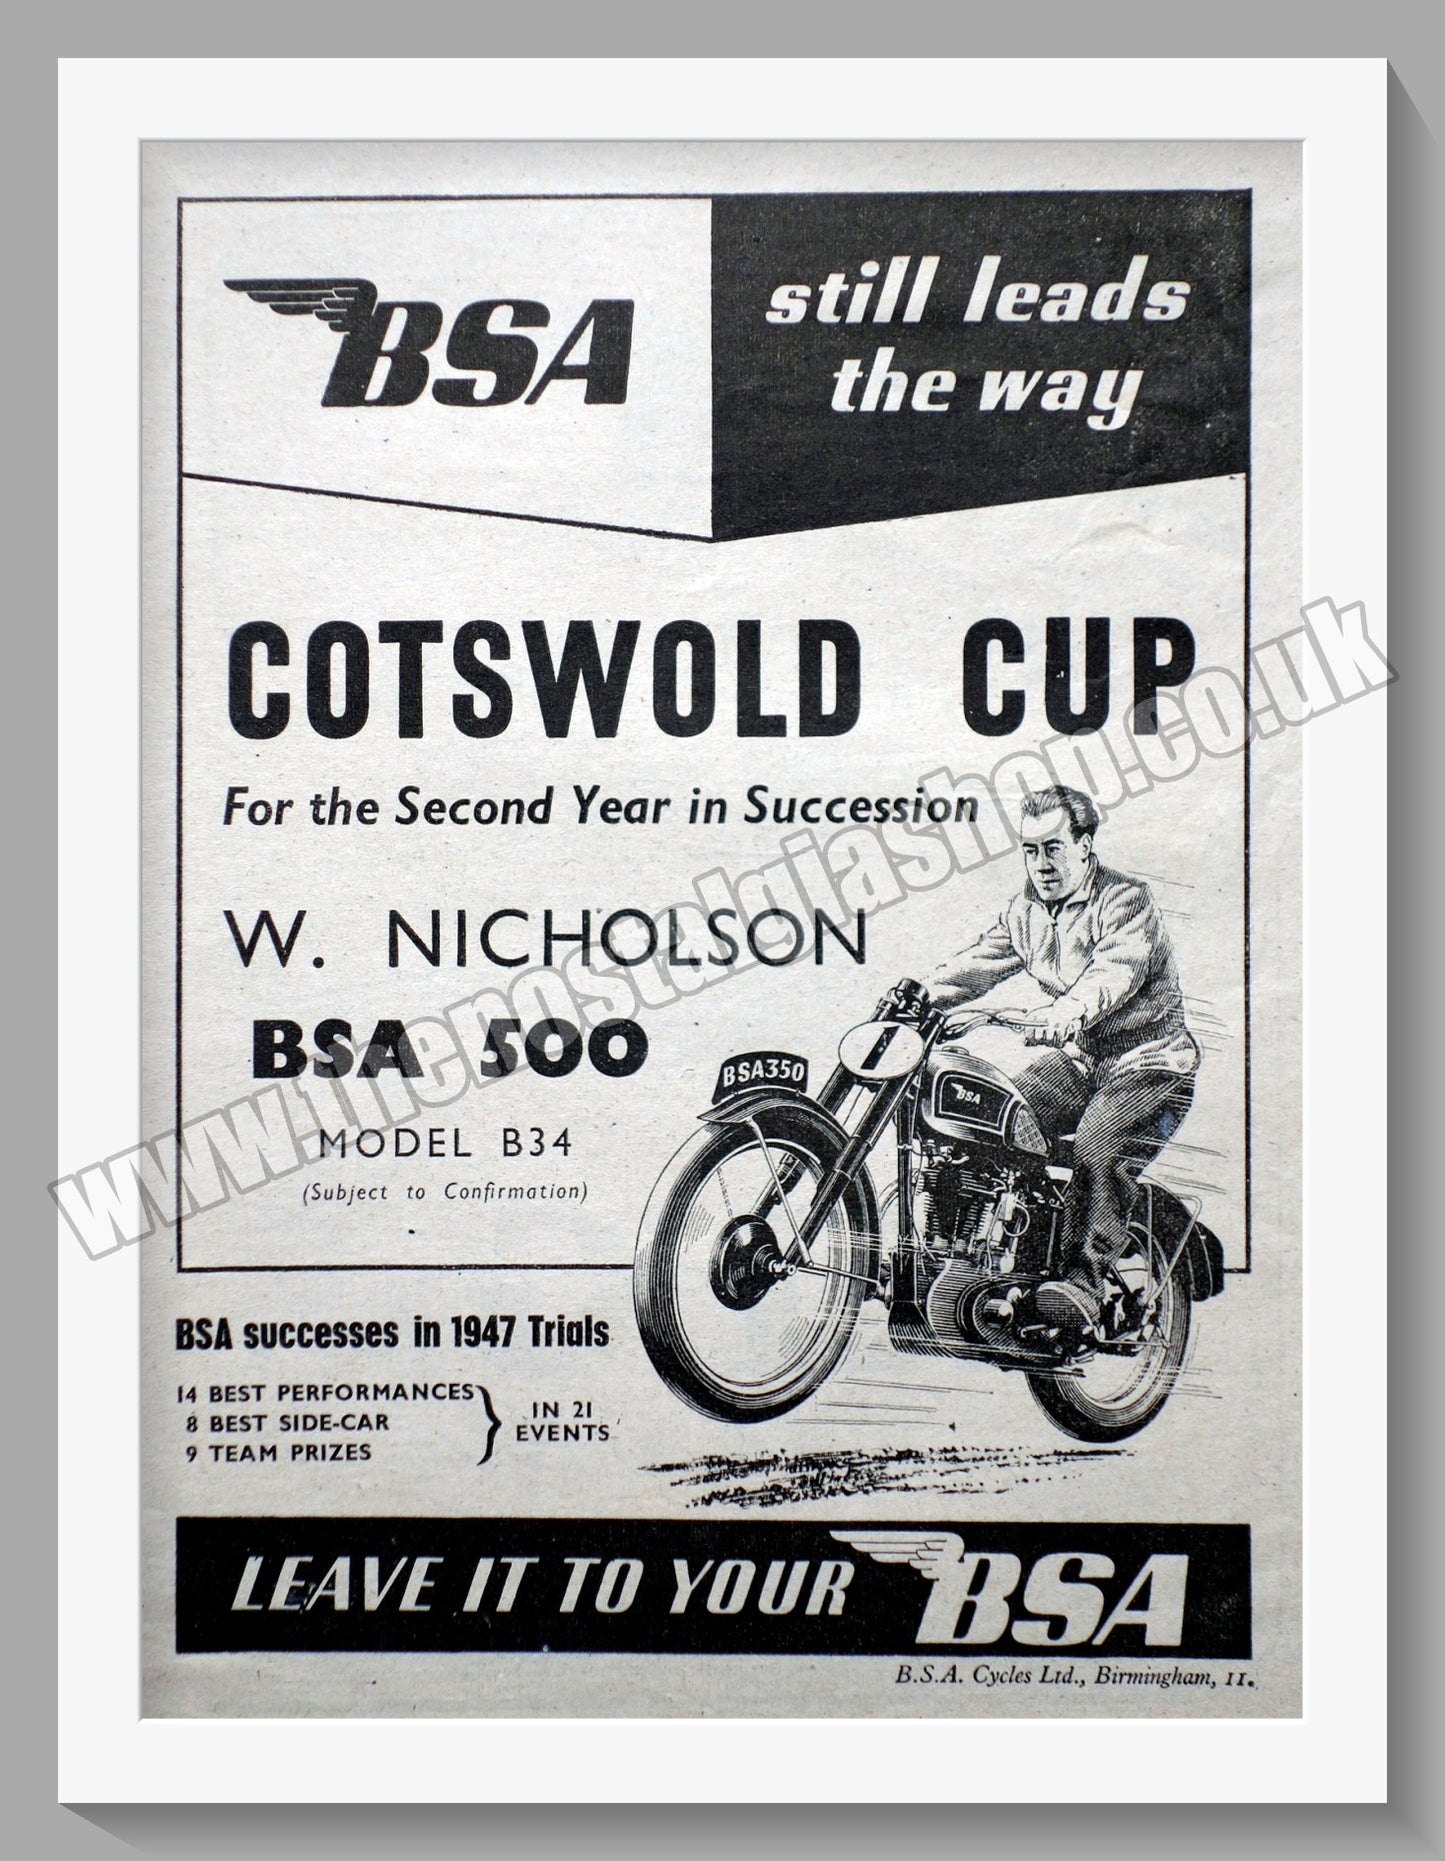 BSA Wins The Cotswold Cup. Original Advert 1948 (ref AD56648)